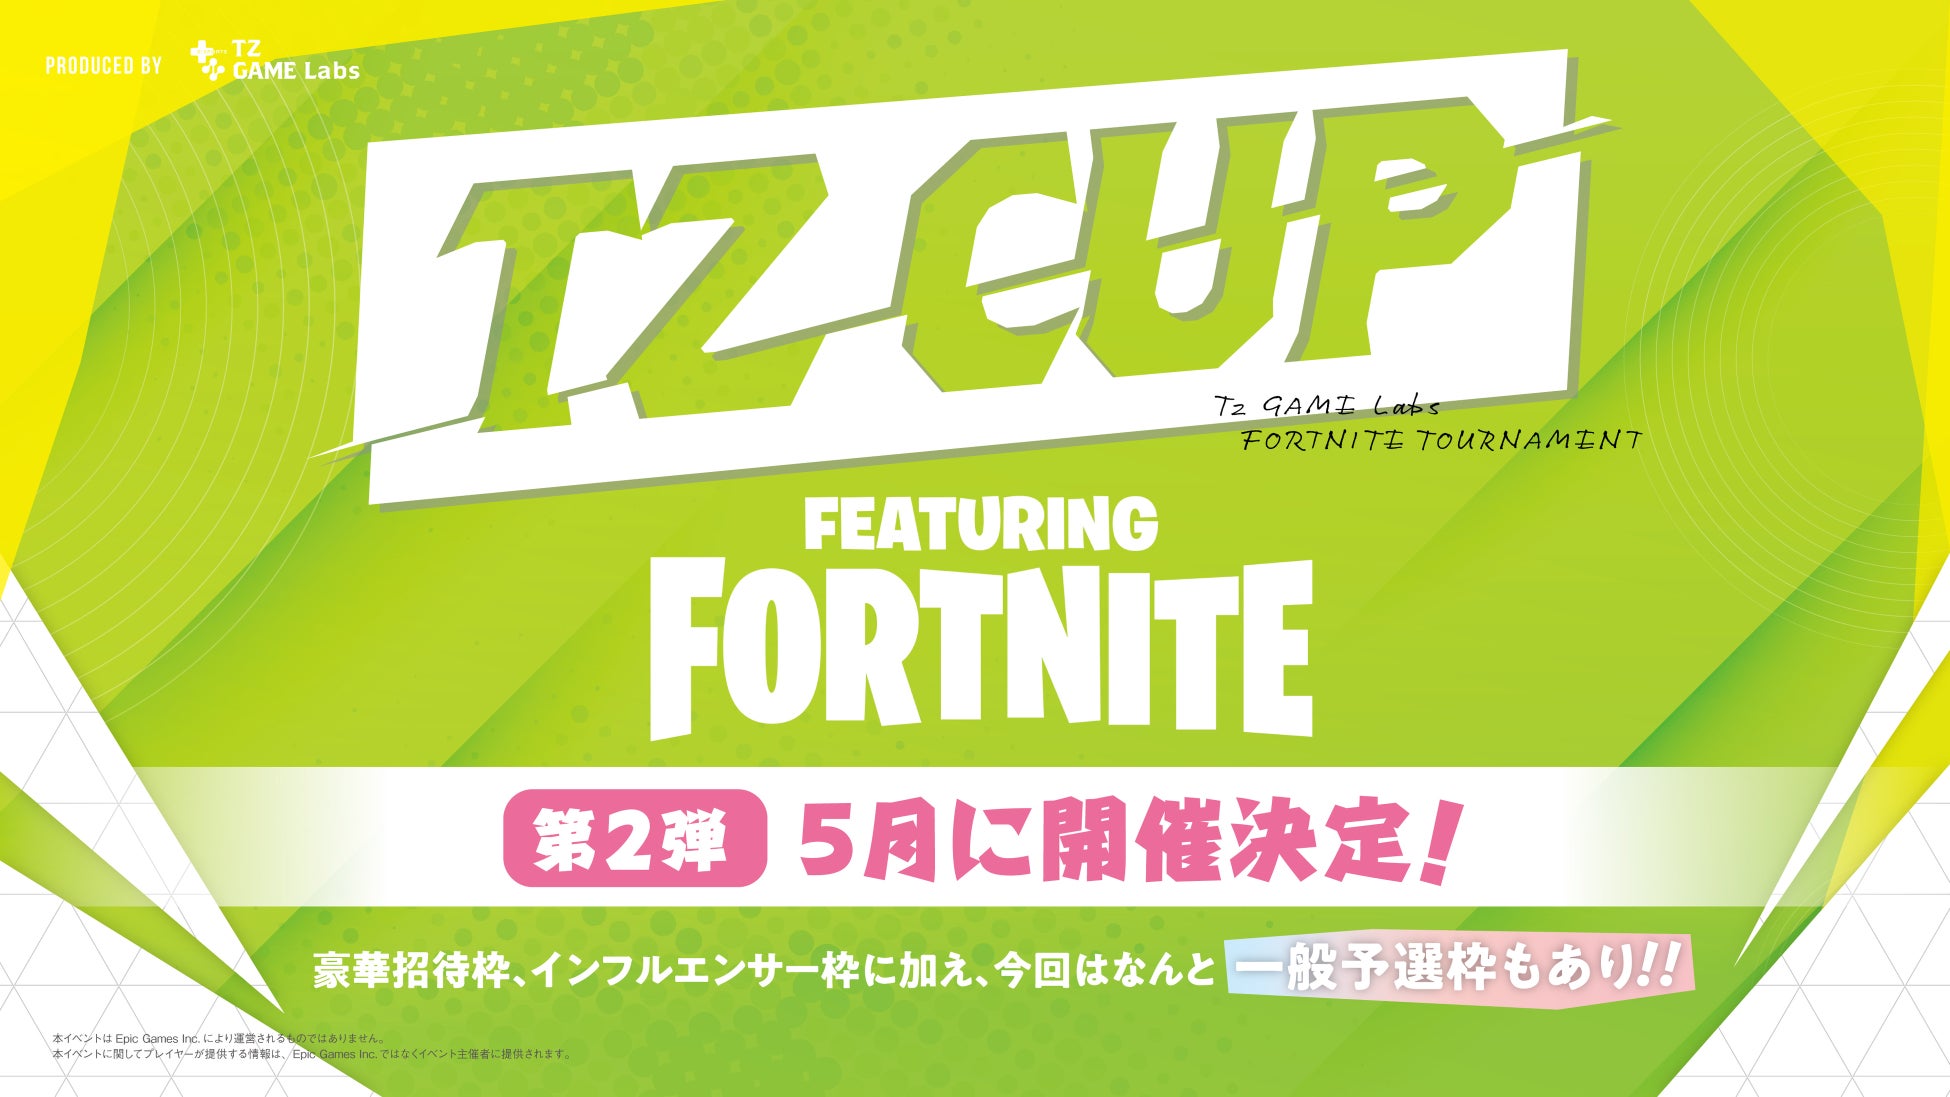 TZ GAME Labs『LR CUP』/『DELTA CUP』に協賛！